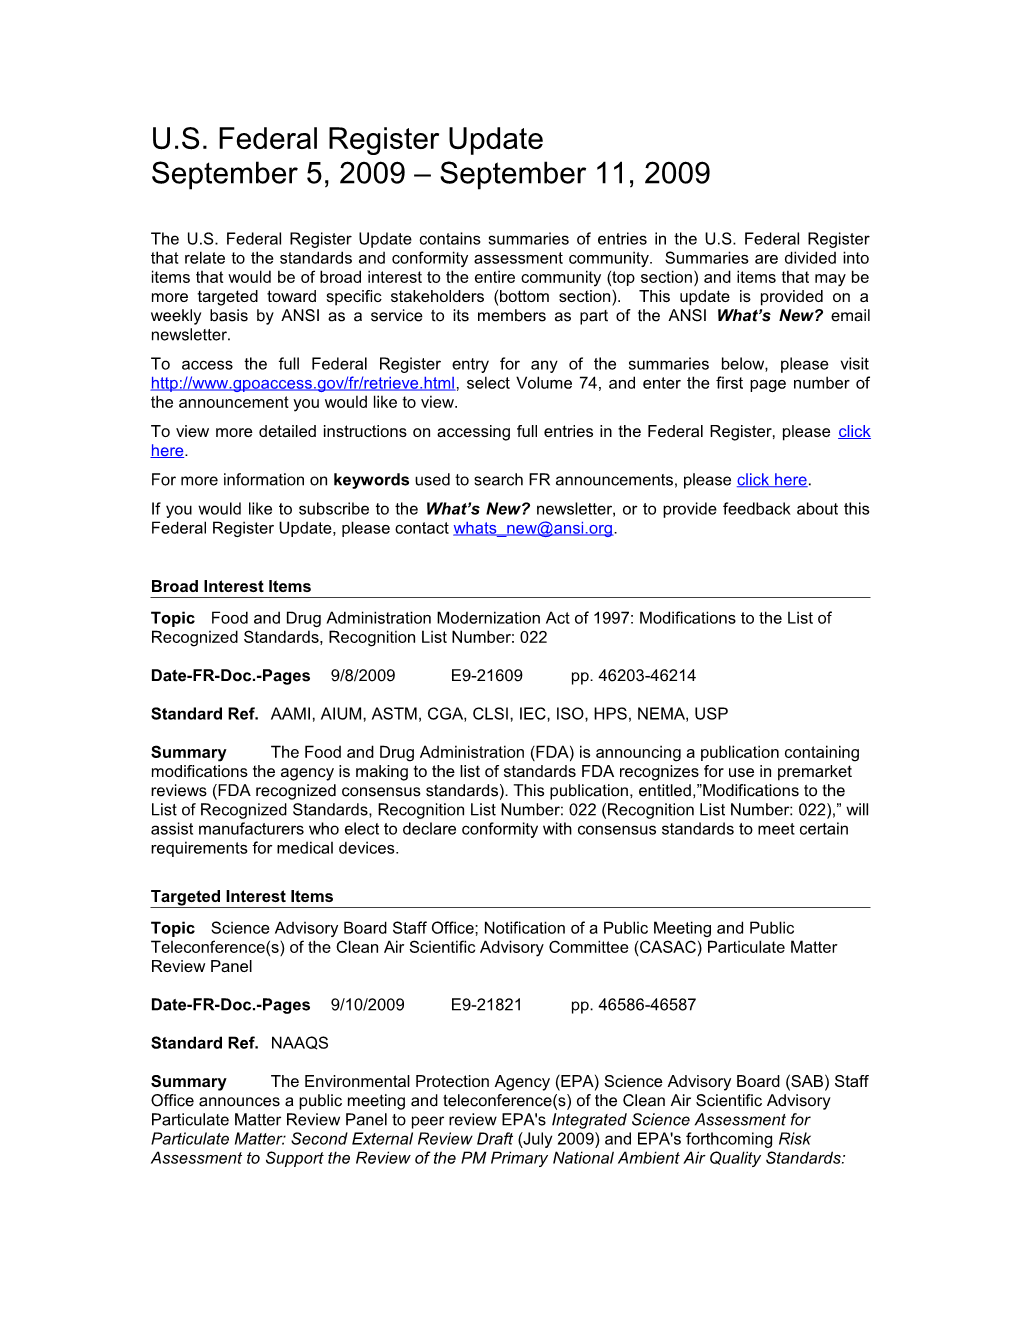 Standards and Trade Related Notices from the U.S. Federal Register, 9.11.09